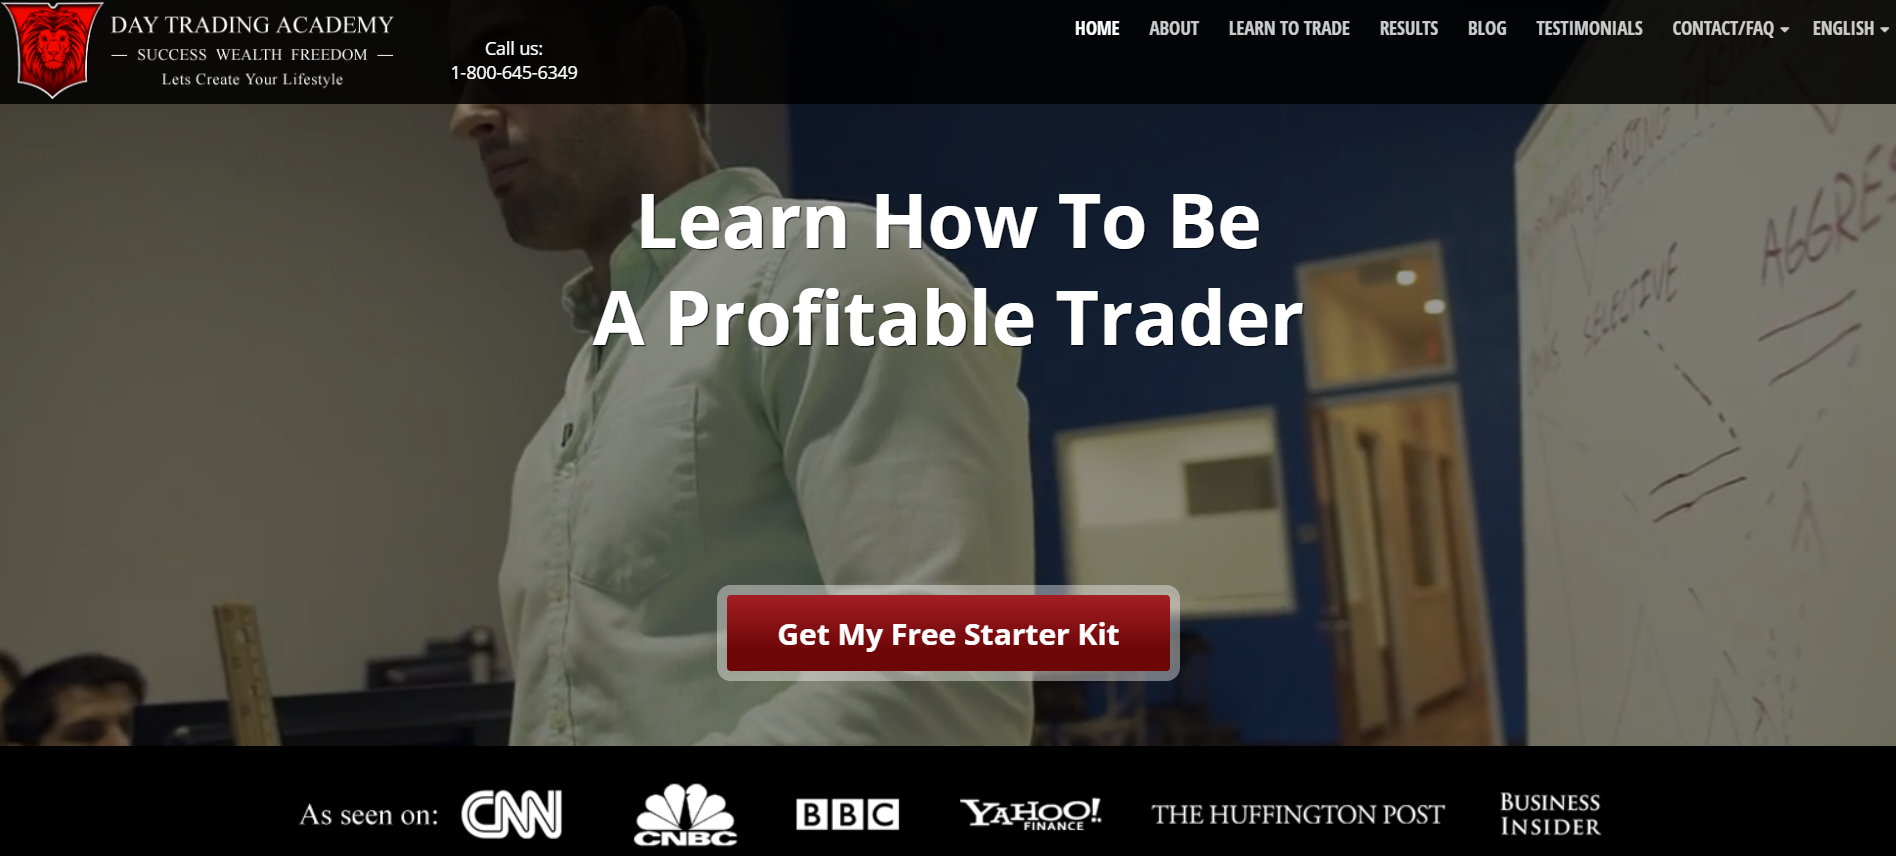 Is Day Trading Academy A Scam? Is Forex Trading A Good Side Gig?